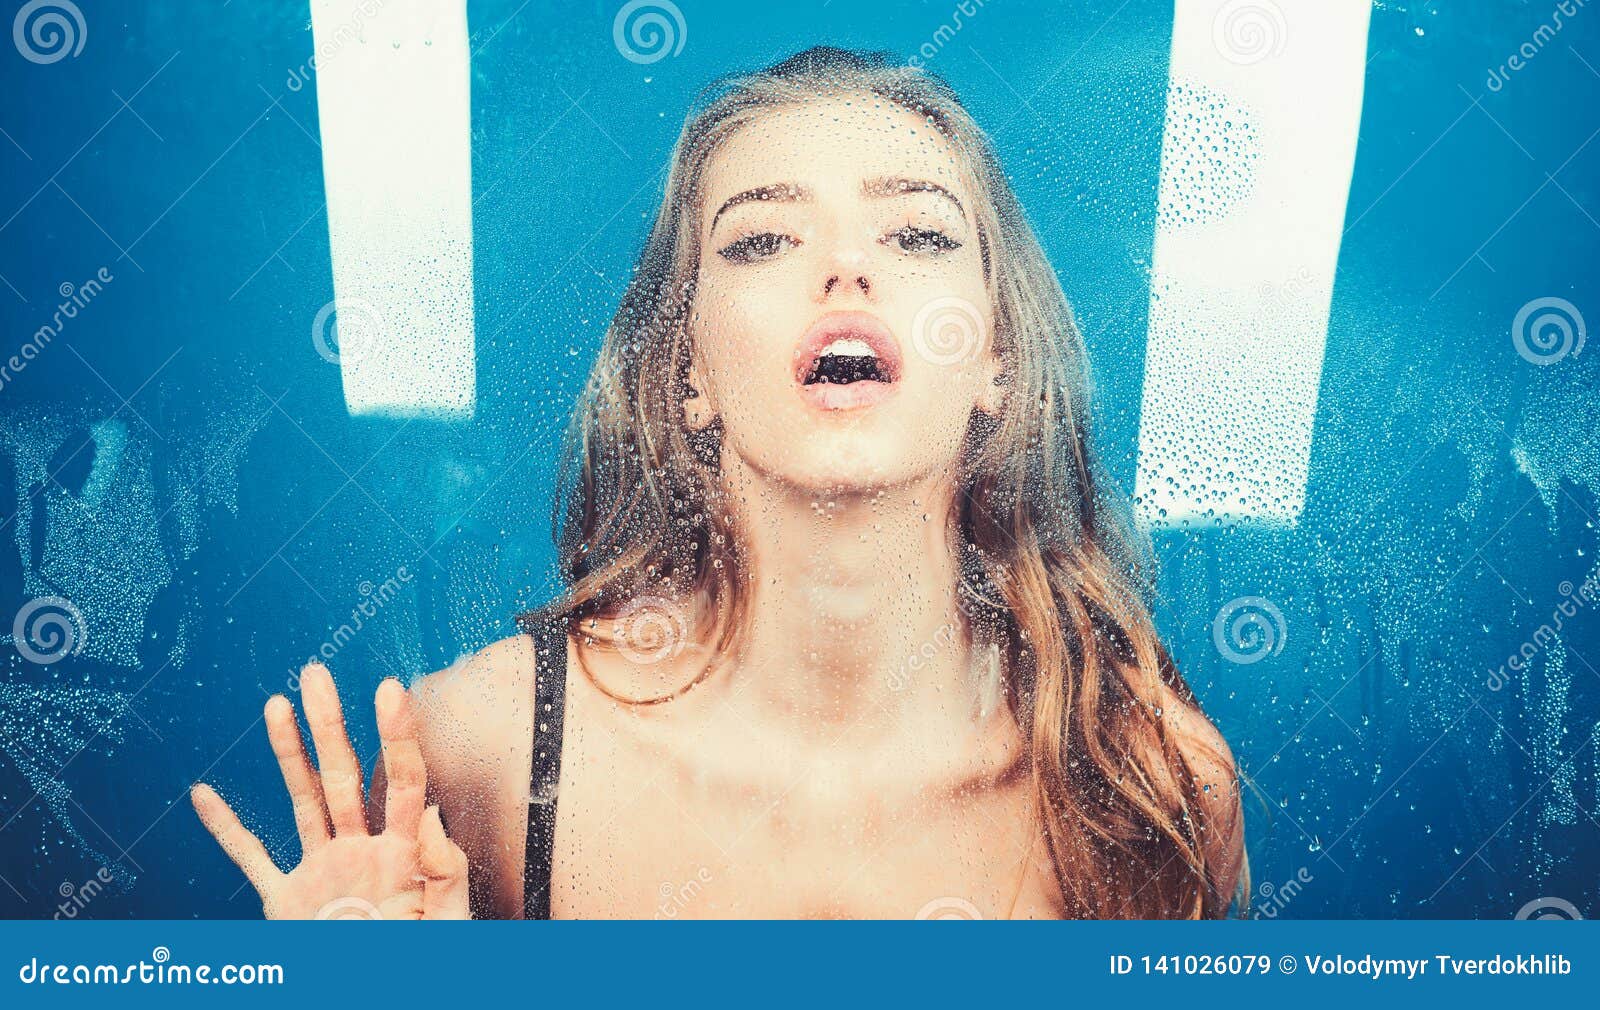 Woman Behind Plastic Sheet With Water Drops Shower And Hygiene Spa Treatment Stock Image